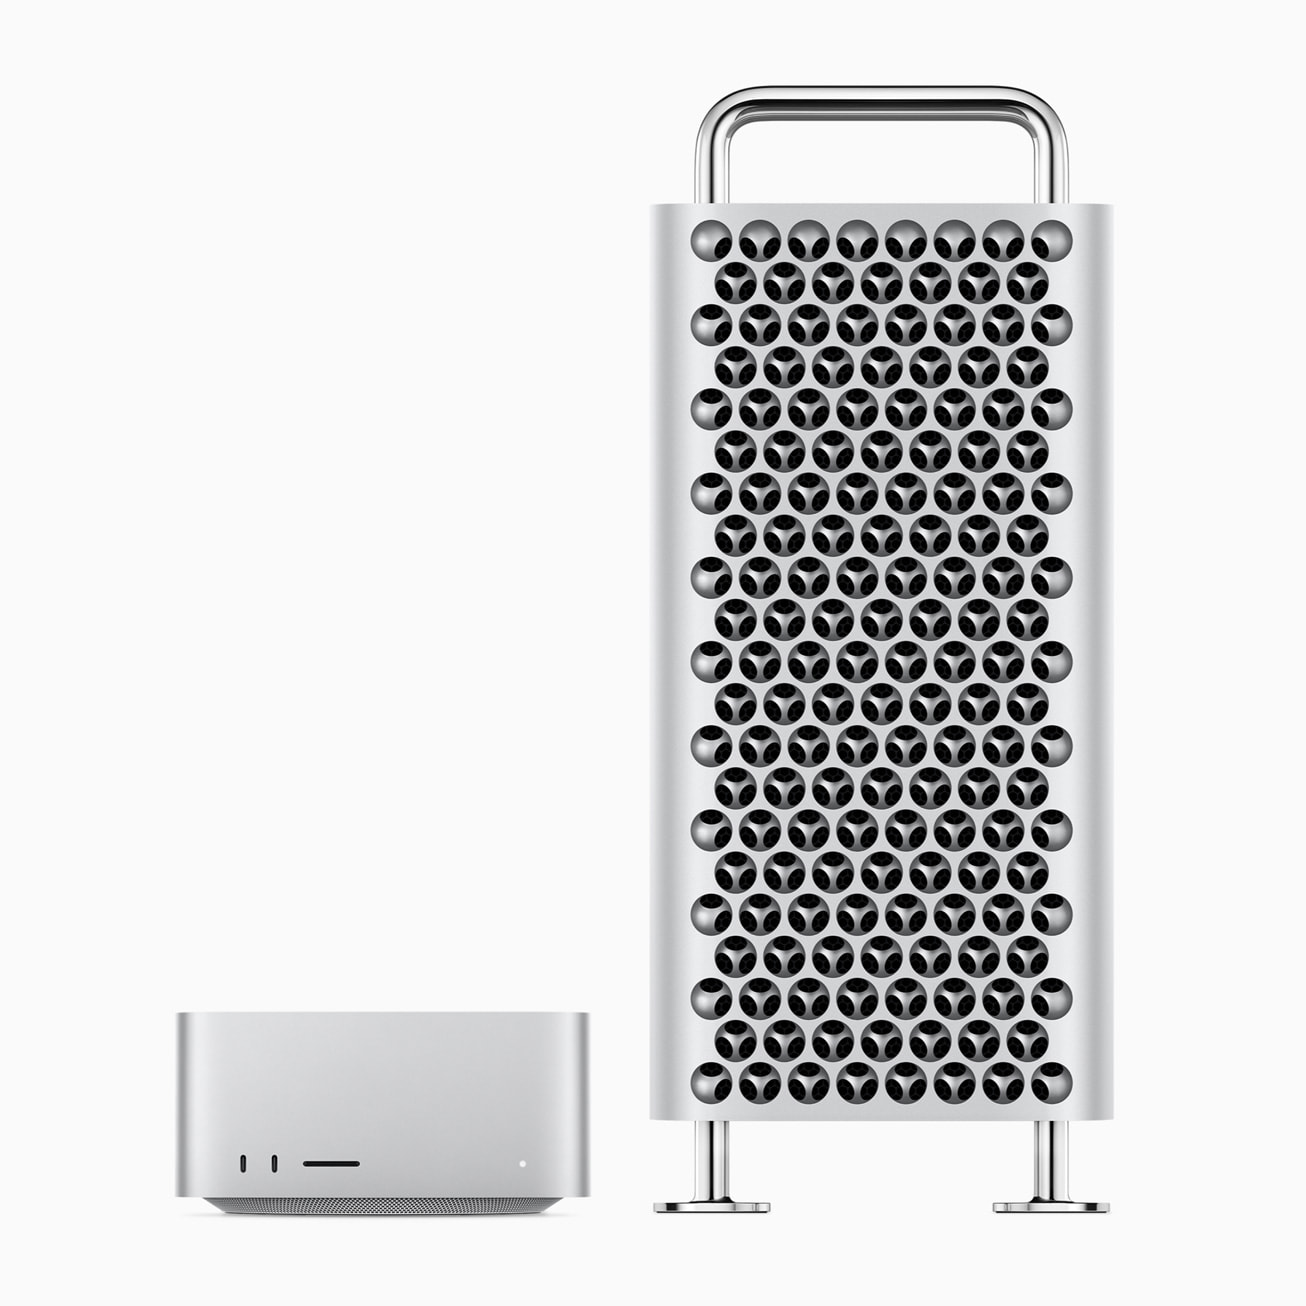 The new MacPro and Mac Studio from Apple